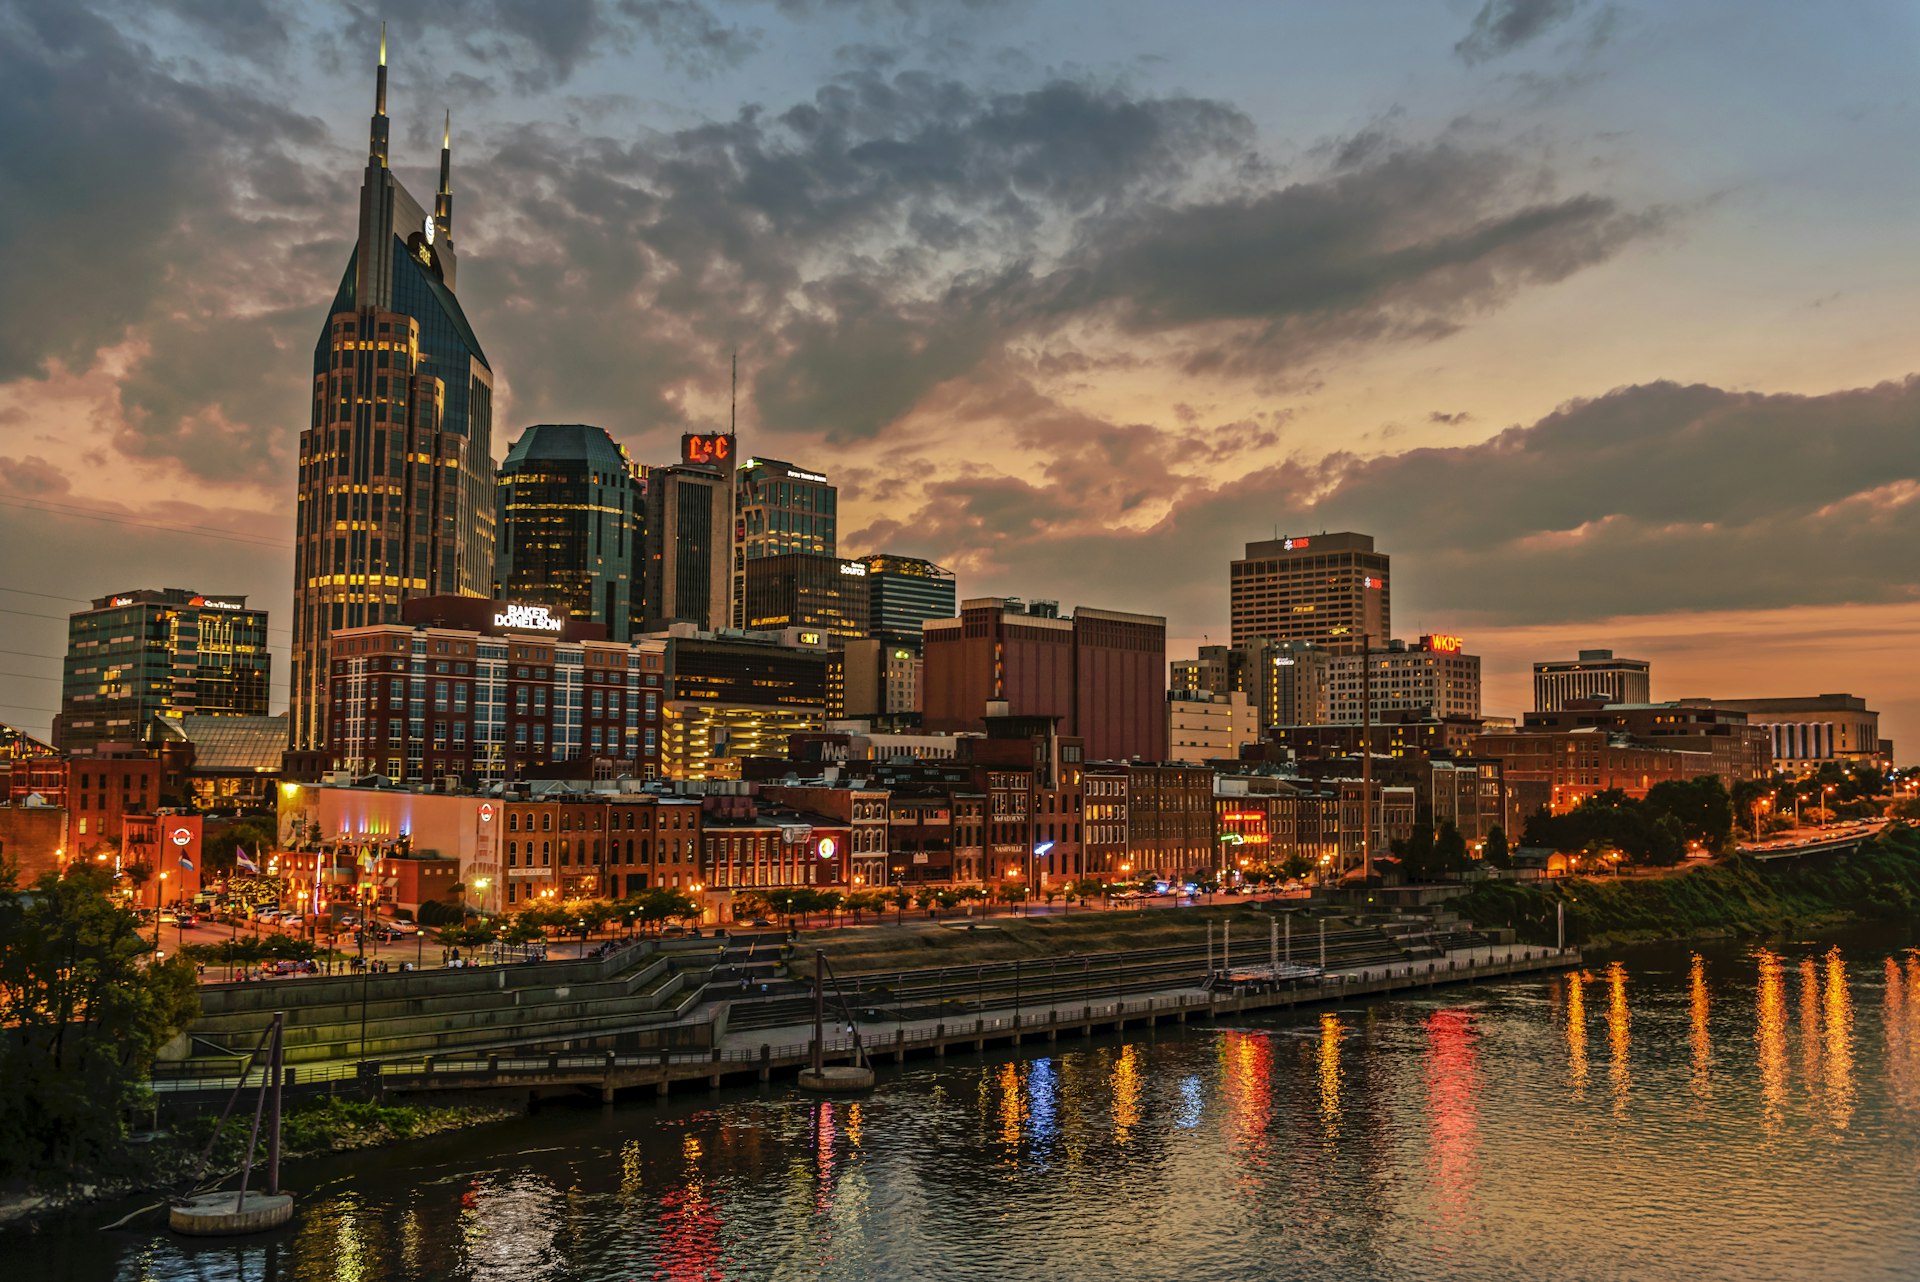 The skyline of Nashville Tennessee, USA at sunset. 531963907 Nashville, Outdoors, USA, Downtown District, Southern USA, Cumberland River, Nashville Rising, Horizontal, Tennessee, Photography, City, Urban Skyline